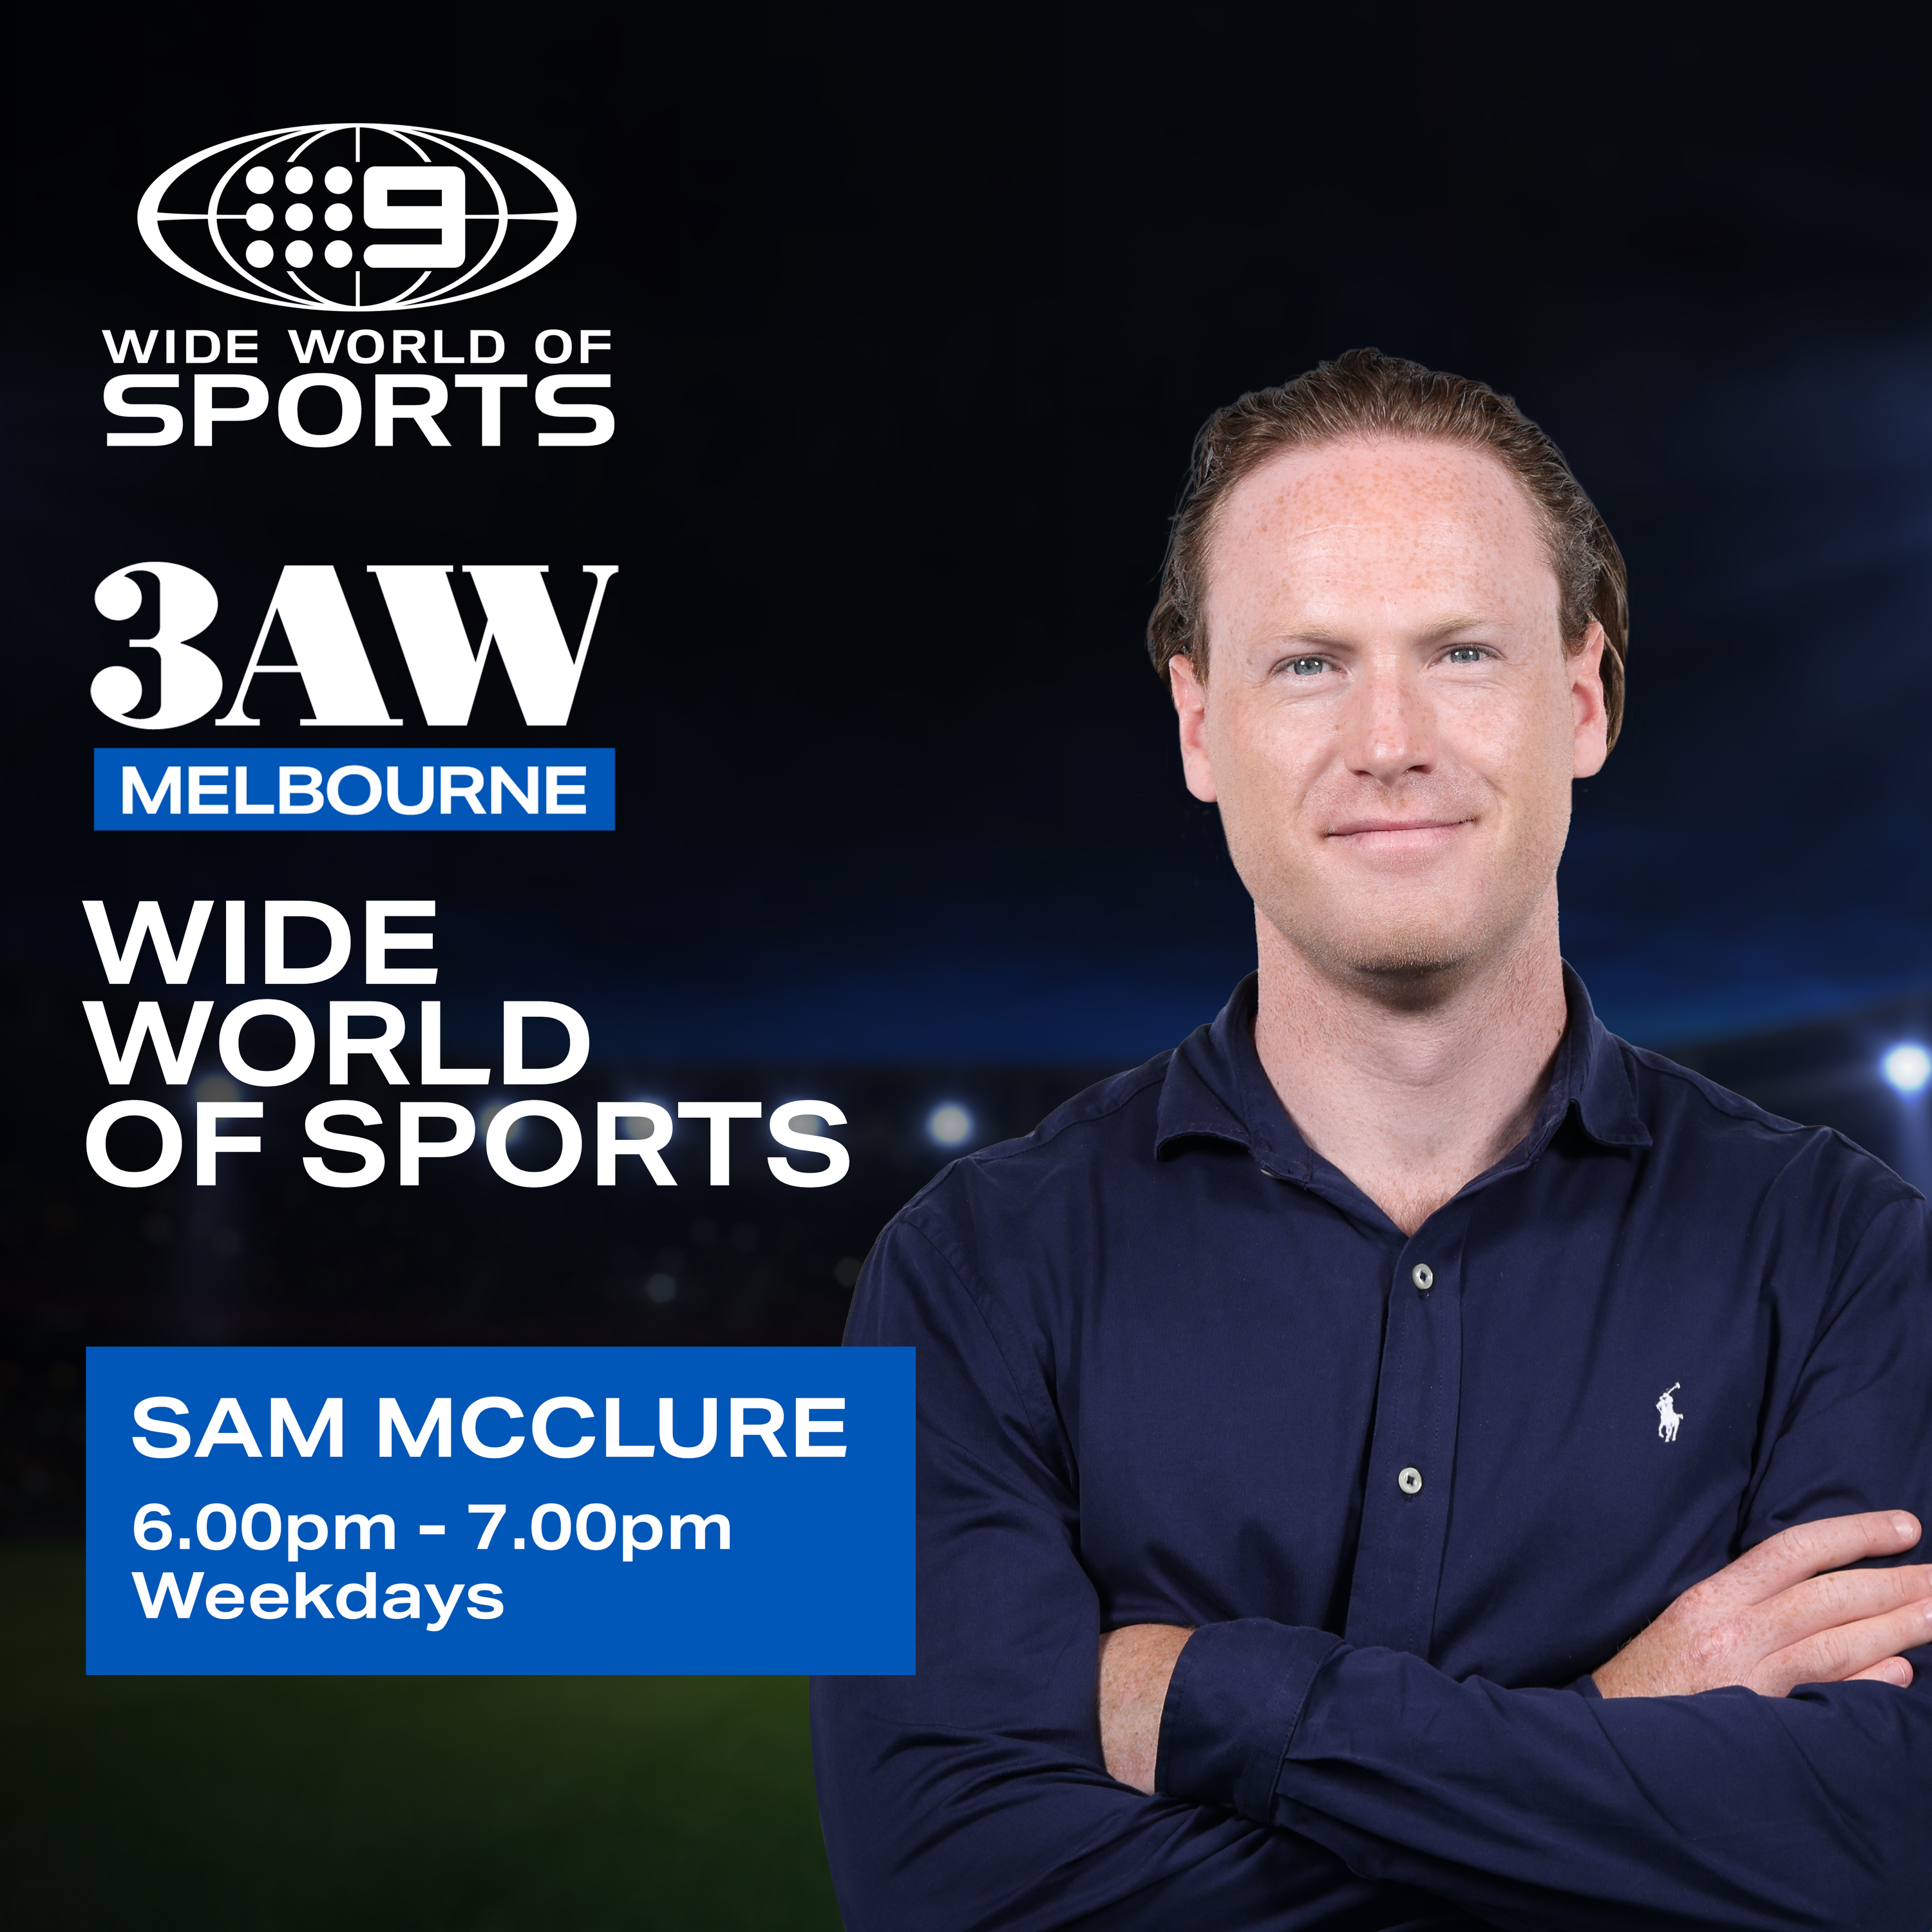 Sam McClure and Richo weigh in on conversation surrounding premiership medals